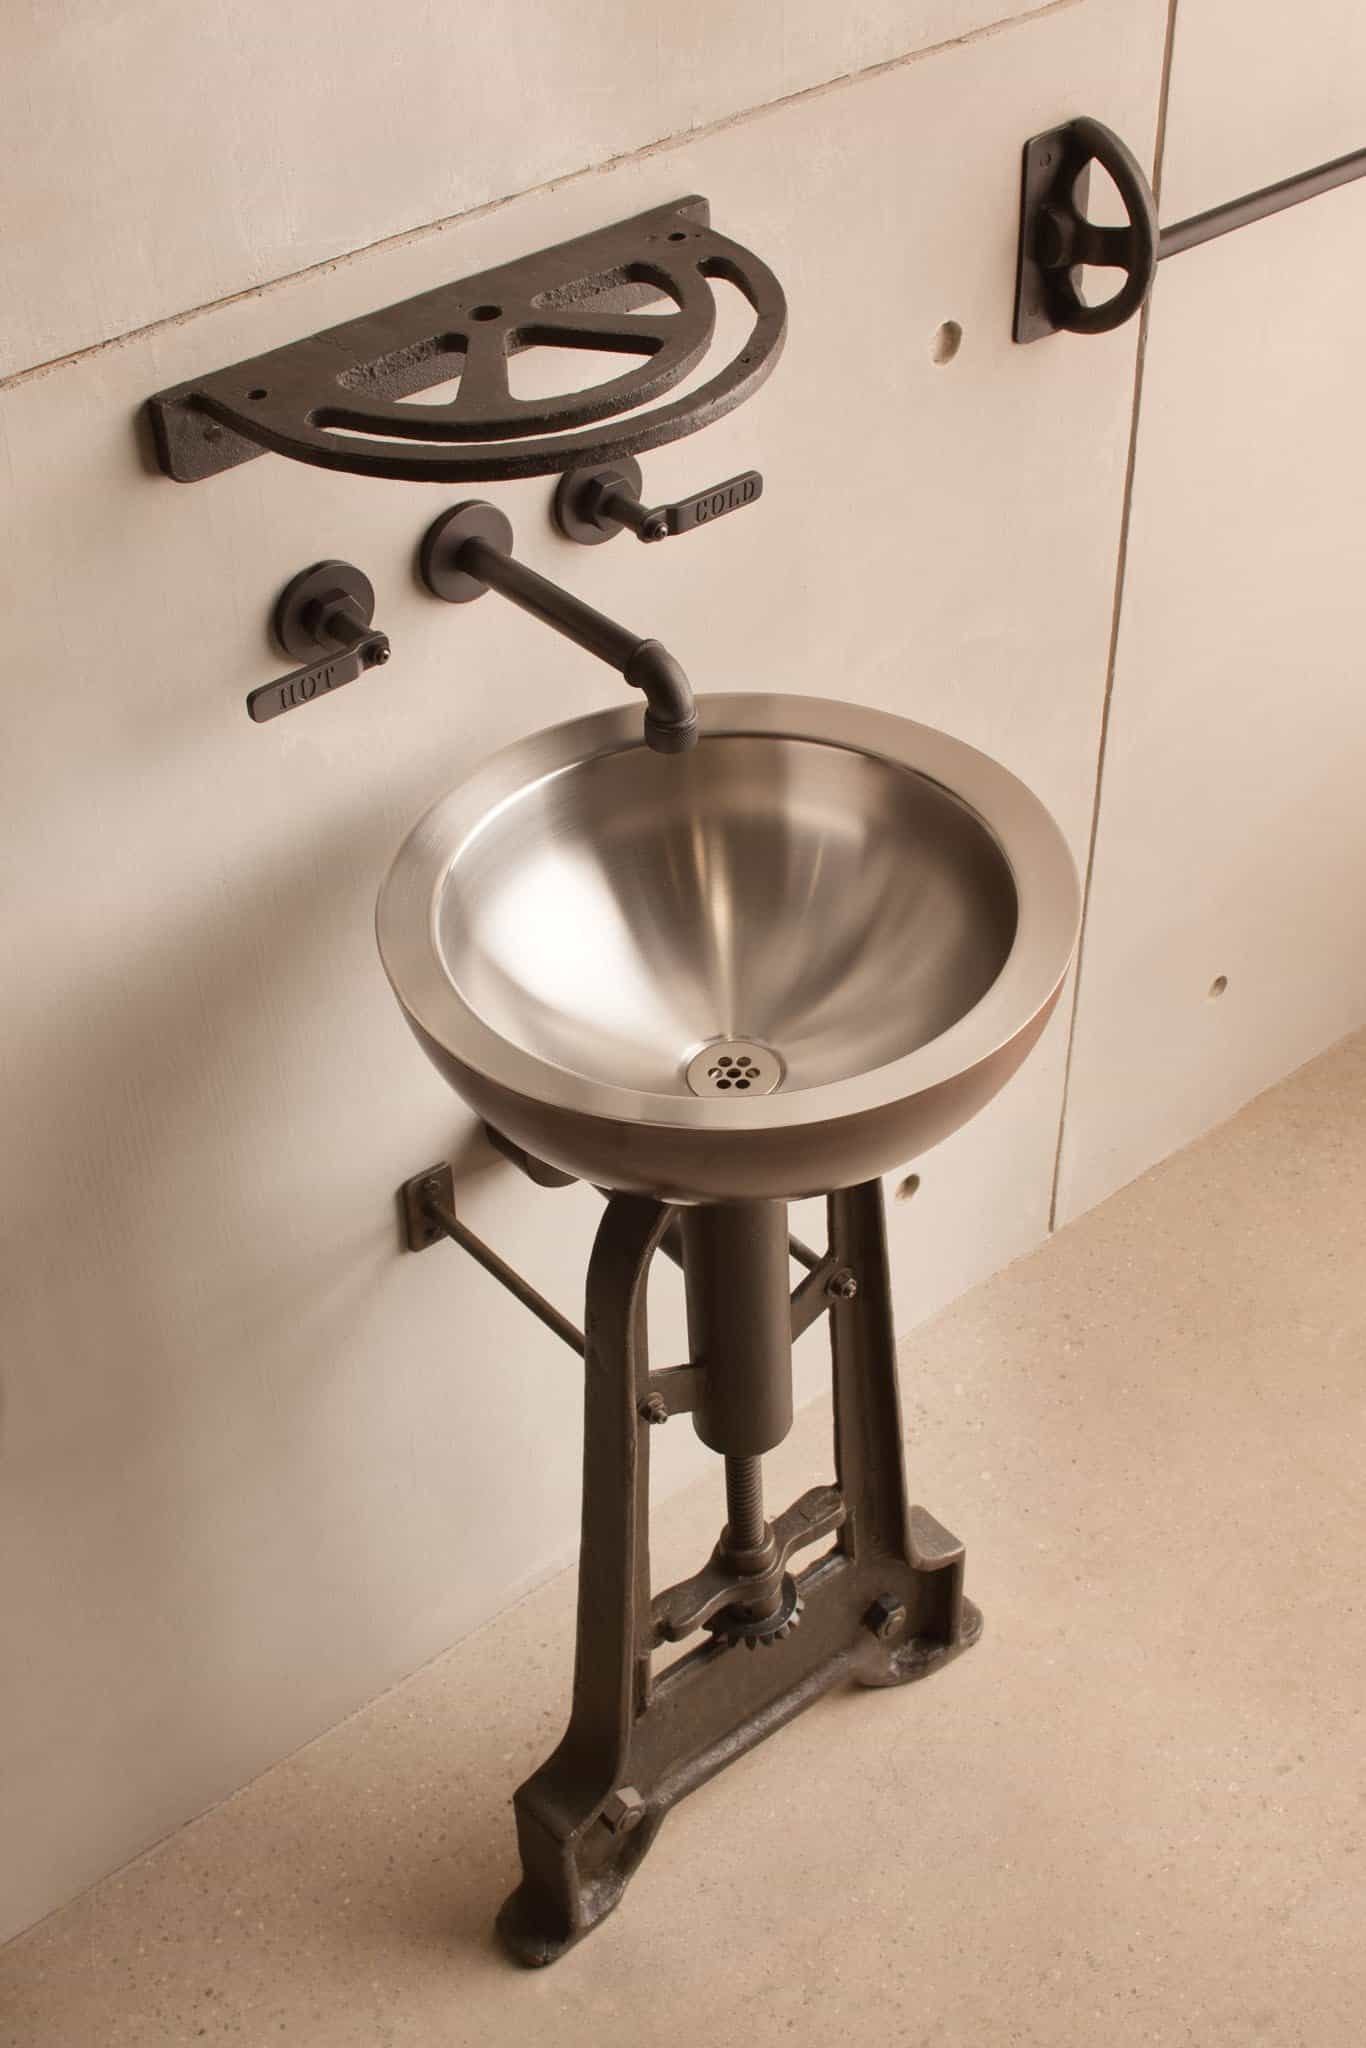 Stone forests industrial pedestal with beveled round vessel sink mixes